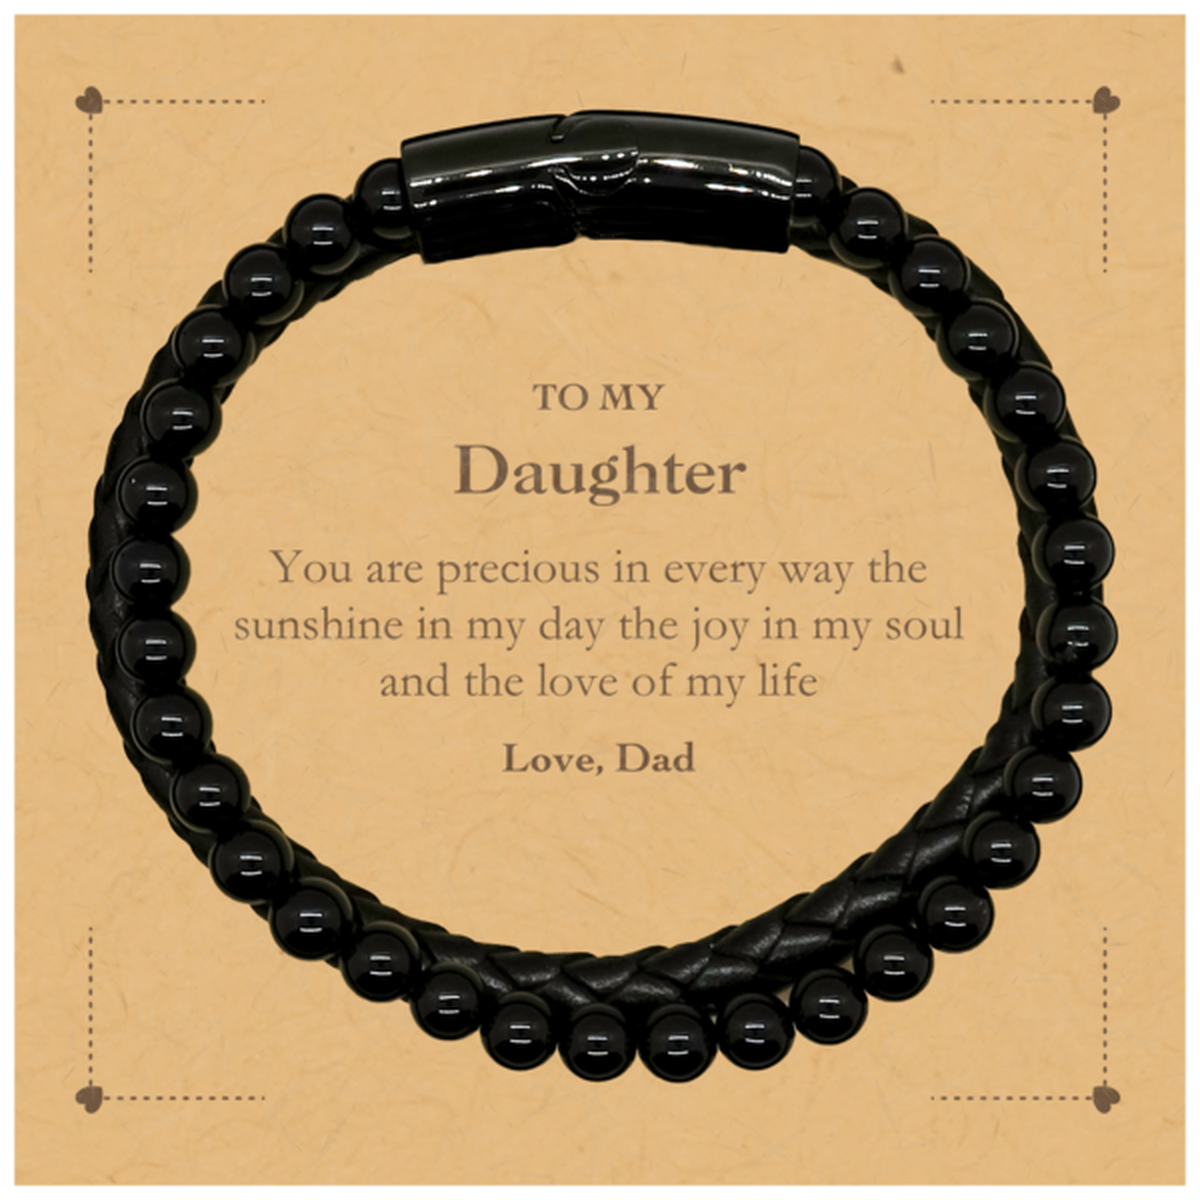 Graduation Gifts for Daughter Stone Leather Bracelets Present from Dad, Christmas Daughter Birthday Gifts Daughter You are precious in every way the sunshine in my day. Love, Dad